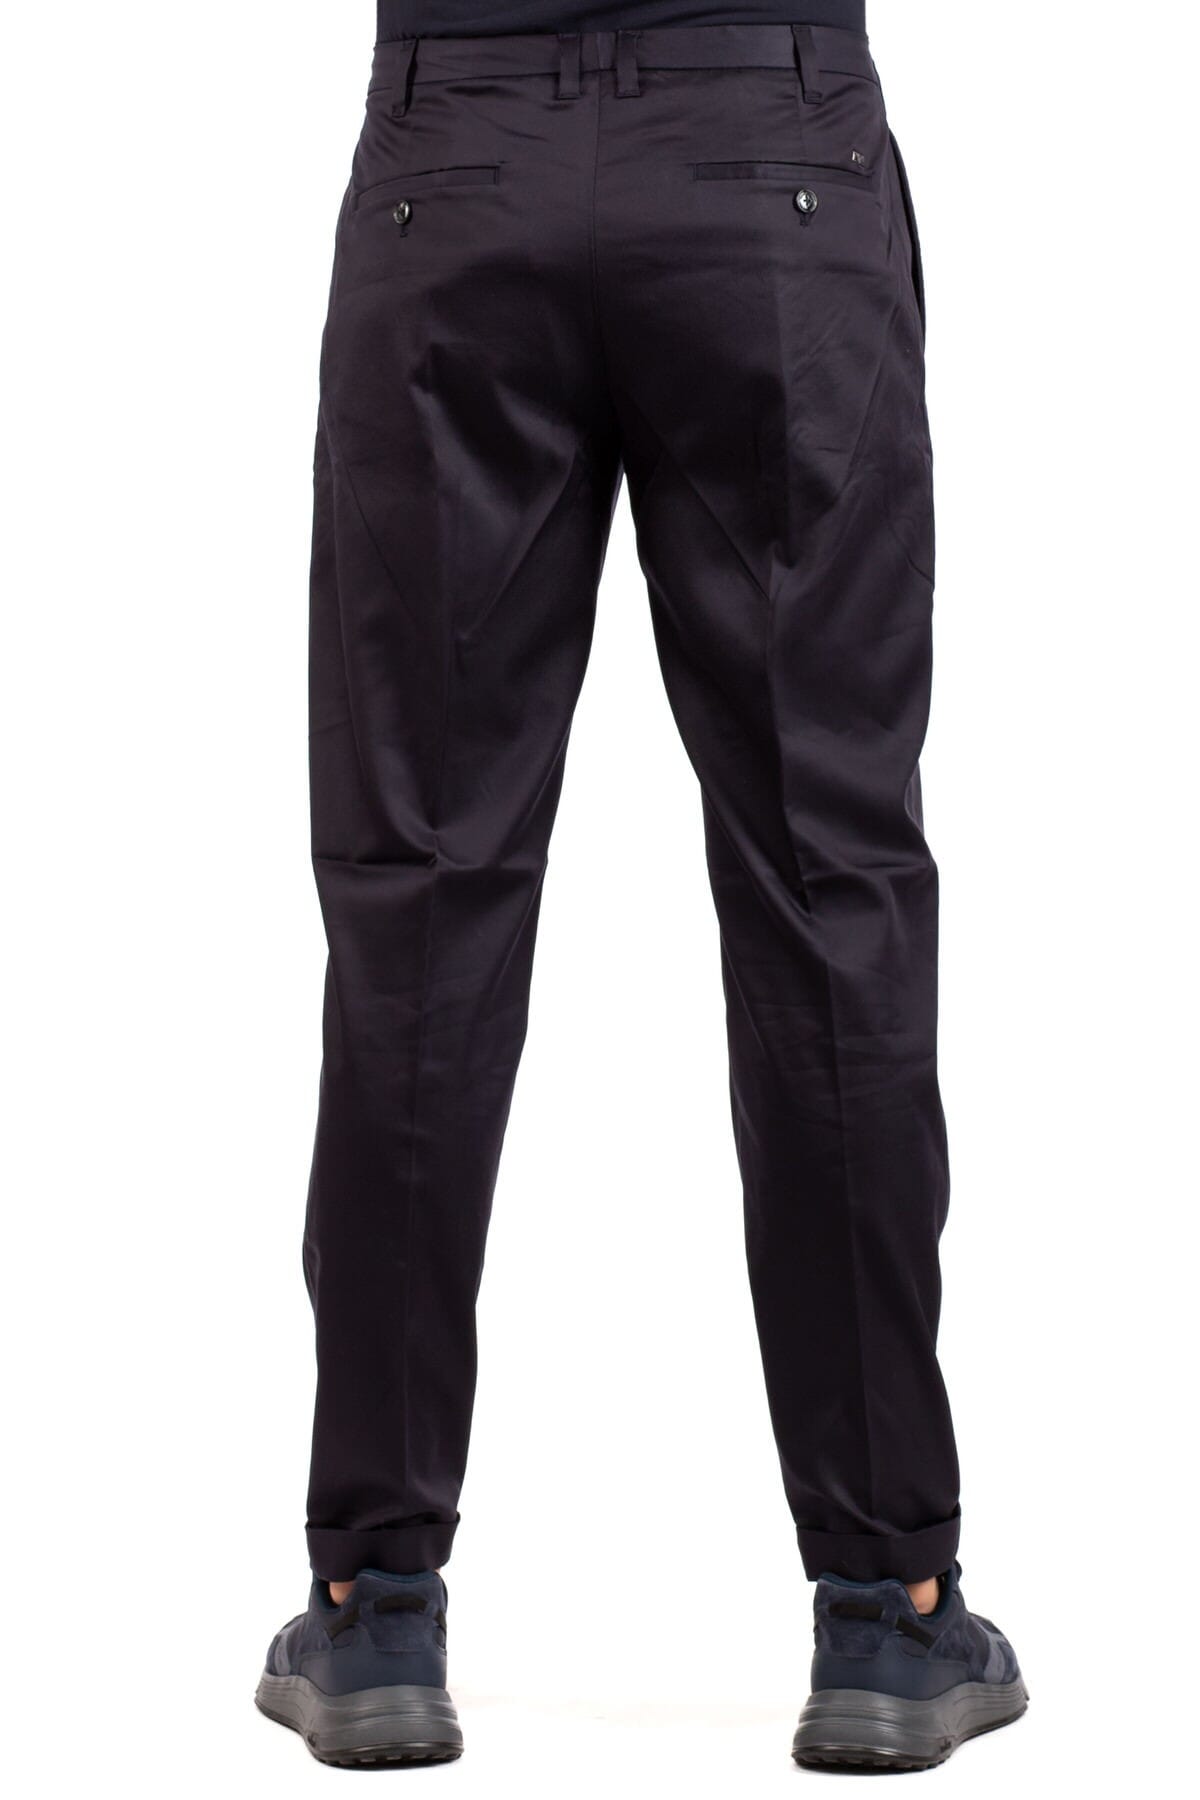 Armani Exchange Trousers outlet - 1800 products on sale | FASHIOLA.co.uk